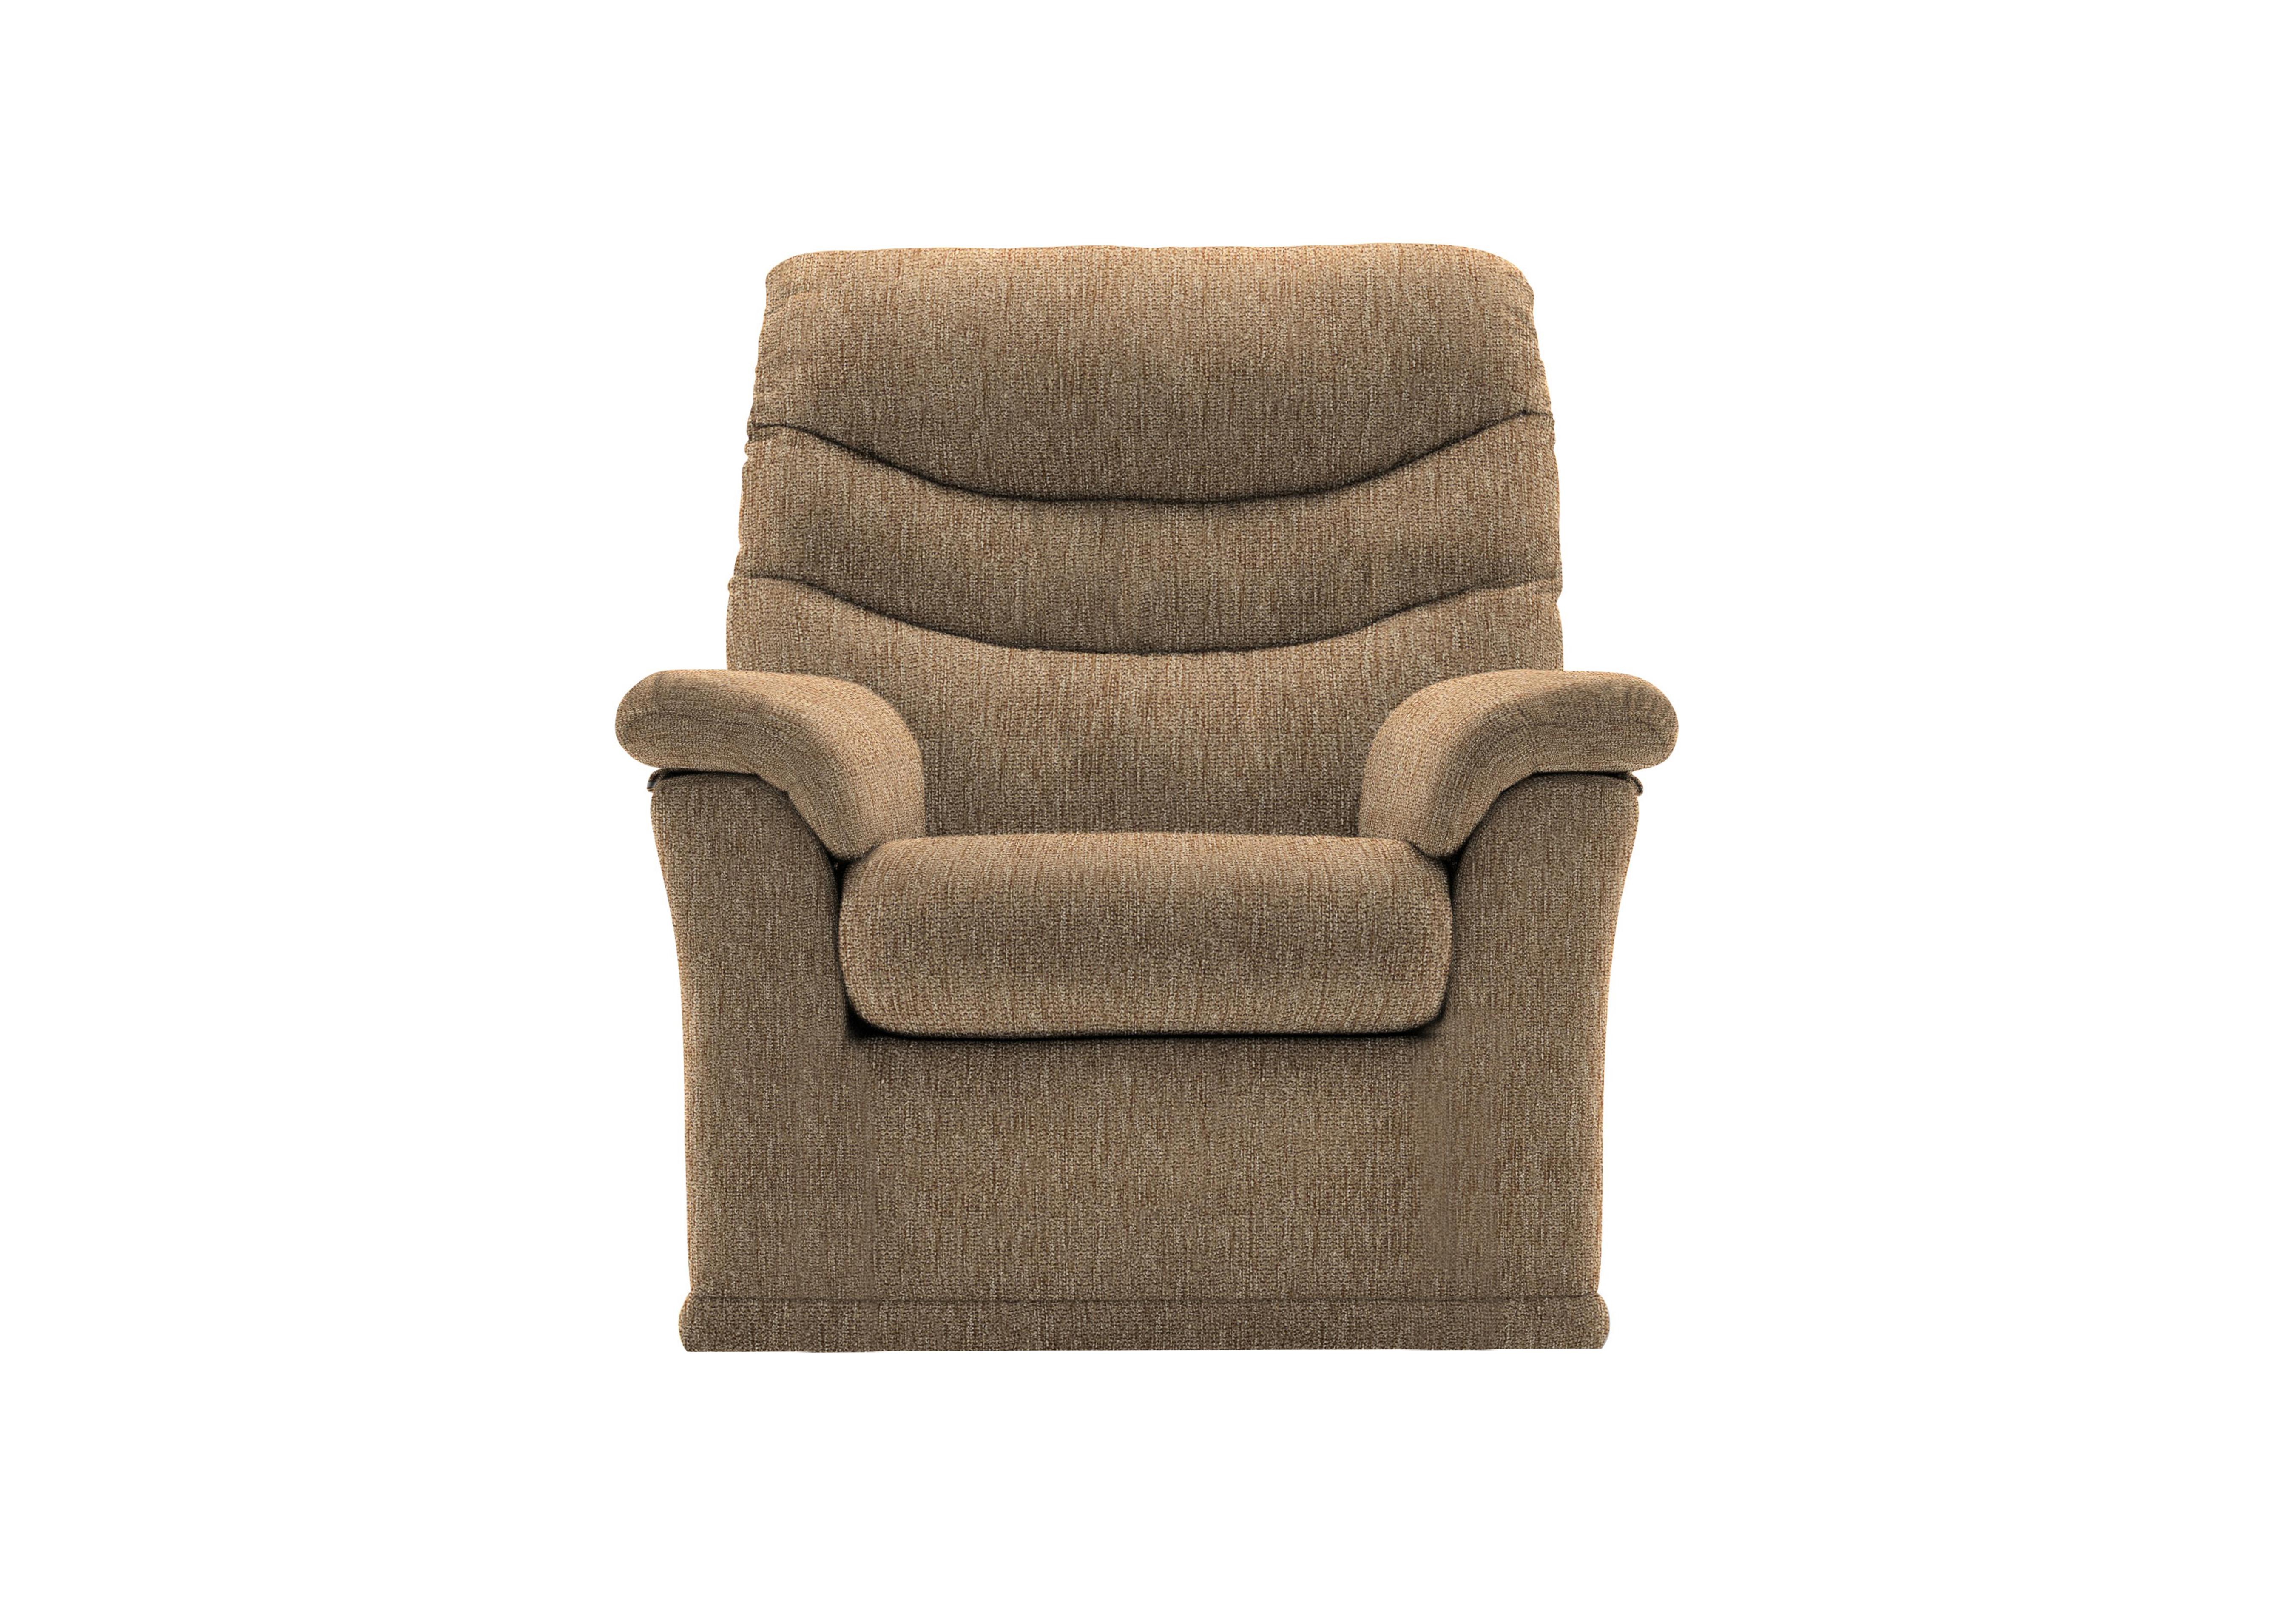 Malvern Fabric Armchair in A070 Boucle Cocoa on Furniture Village